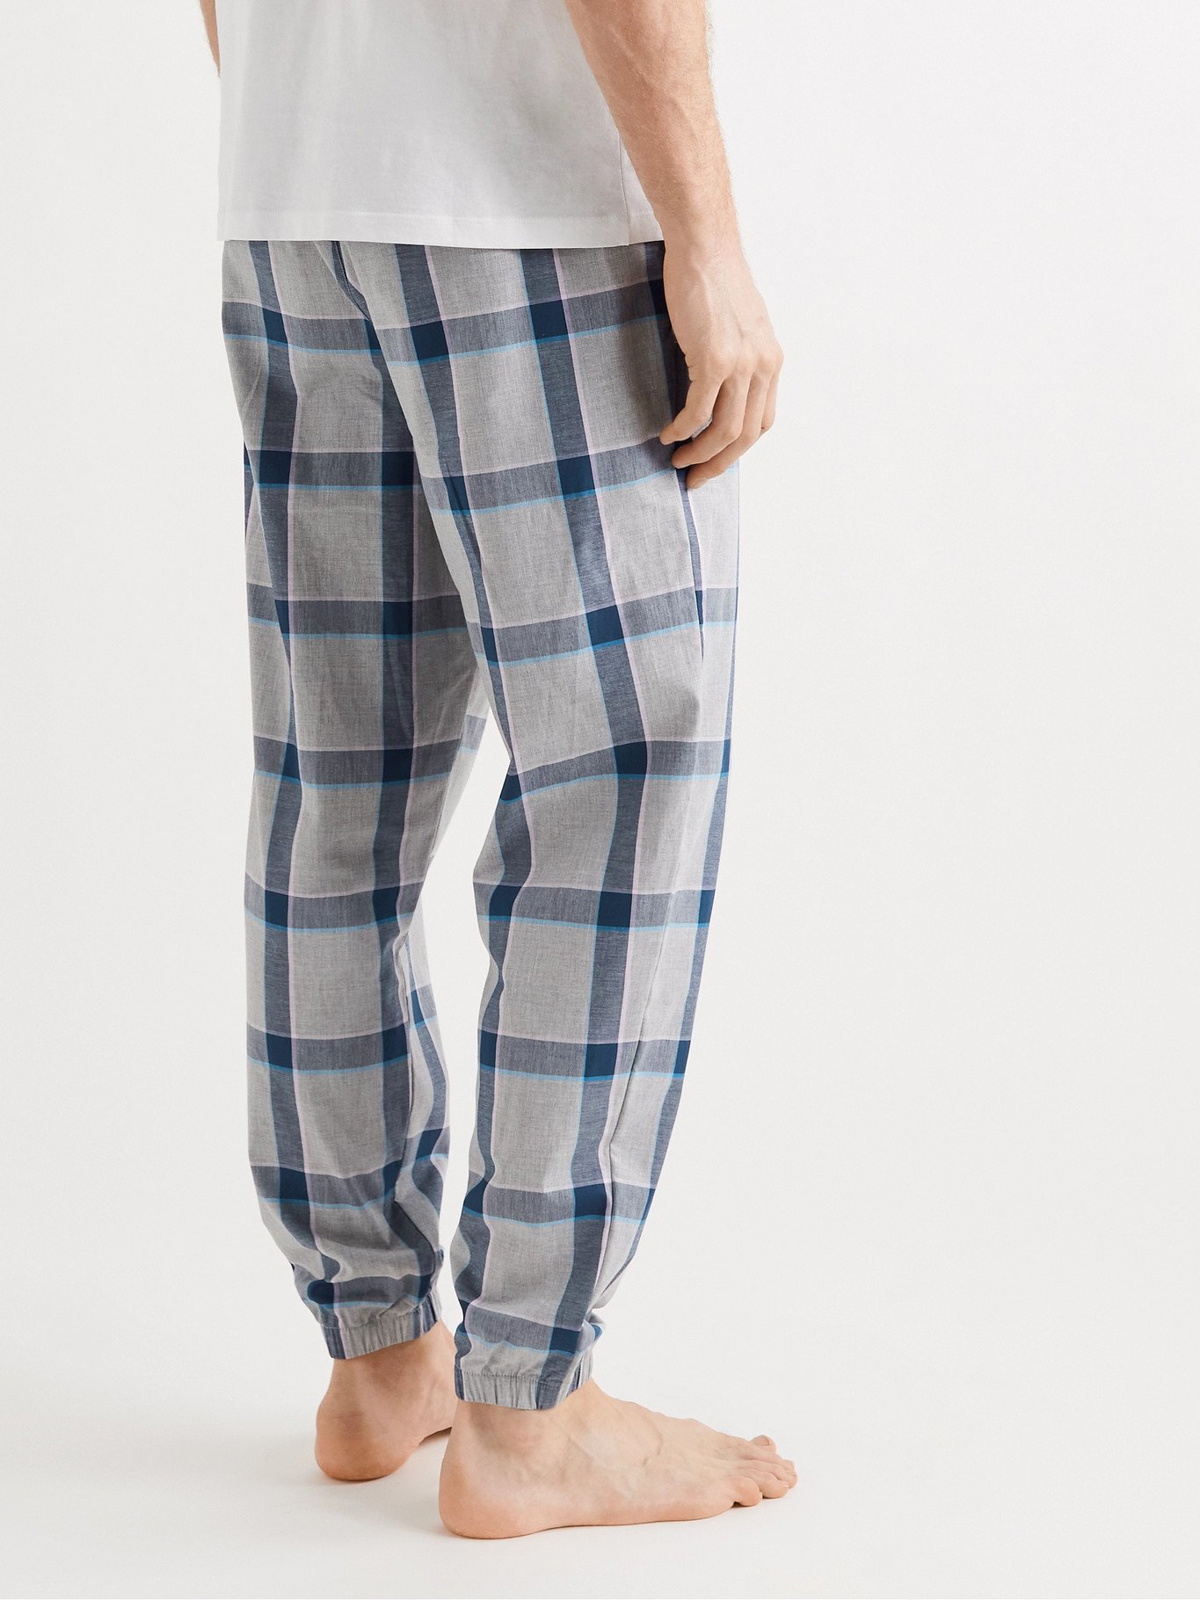 Midnight Blue Cotton Pyjamas – The Daily Outfits